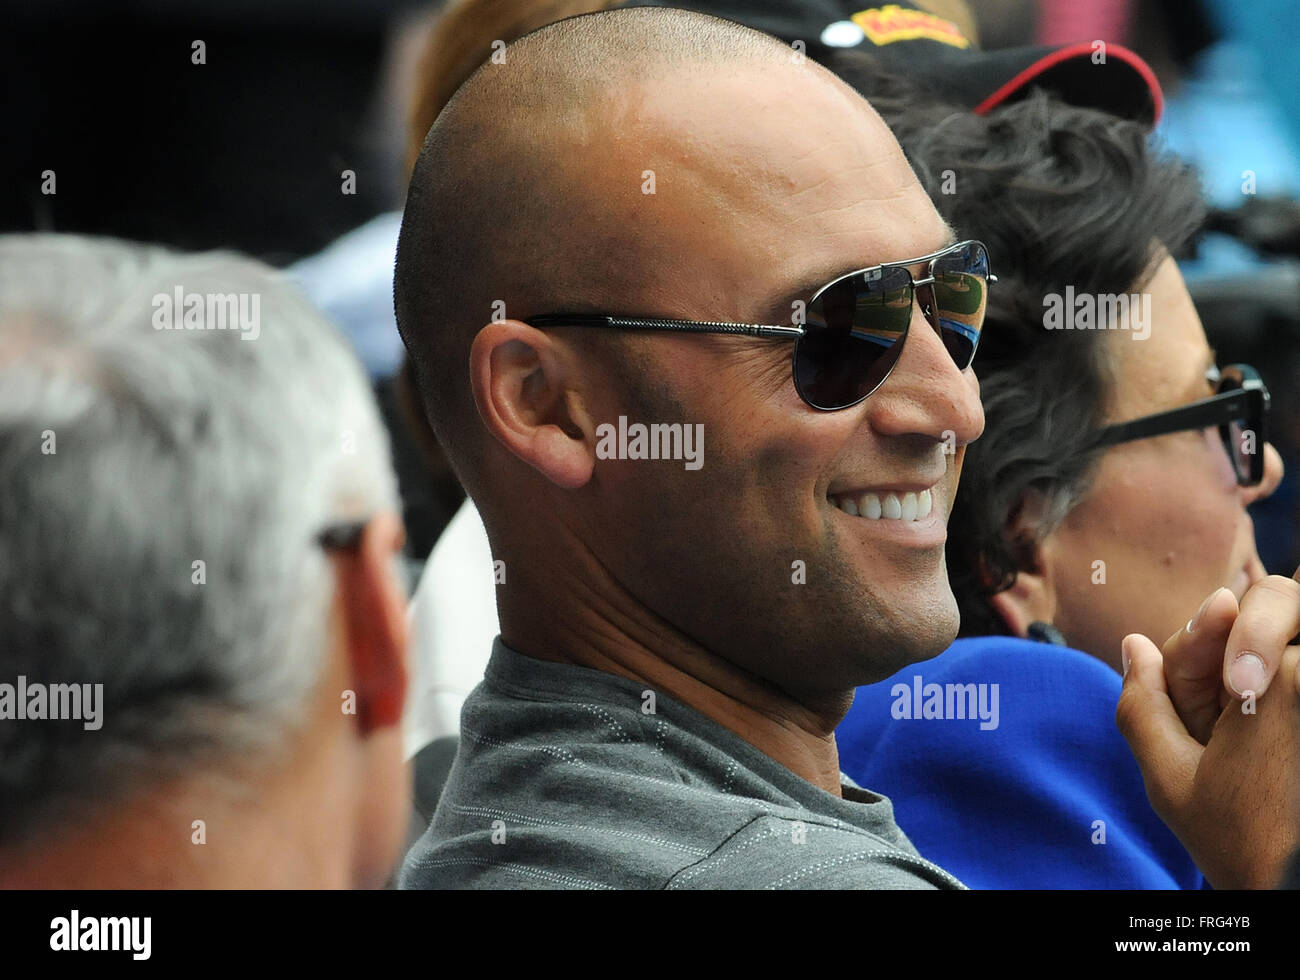 Havana, Cuba. 22nd March, 2016. Retired New York Yankees player Derek Jeter enjoys the exhibition baseball game between the Cuban National team and the Tampa Bay Rays at Estadio Latinamericano in Havana, Cuba on March 22, 2016. Tampa Bay beat the Cuban team 4-1. U.S. President Barack Obama and Cuban President Raul Castro attended the game. Credit:  Paul Hennessy/Alamy Live News Stock Photo